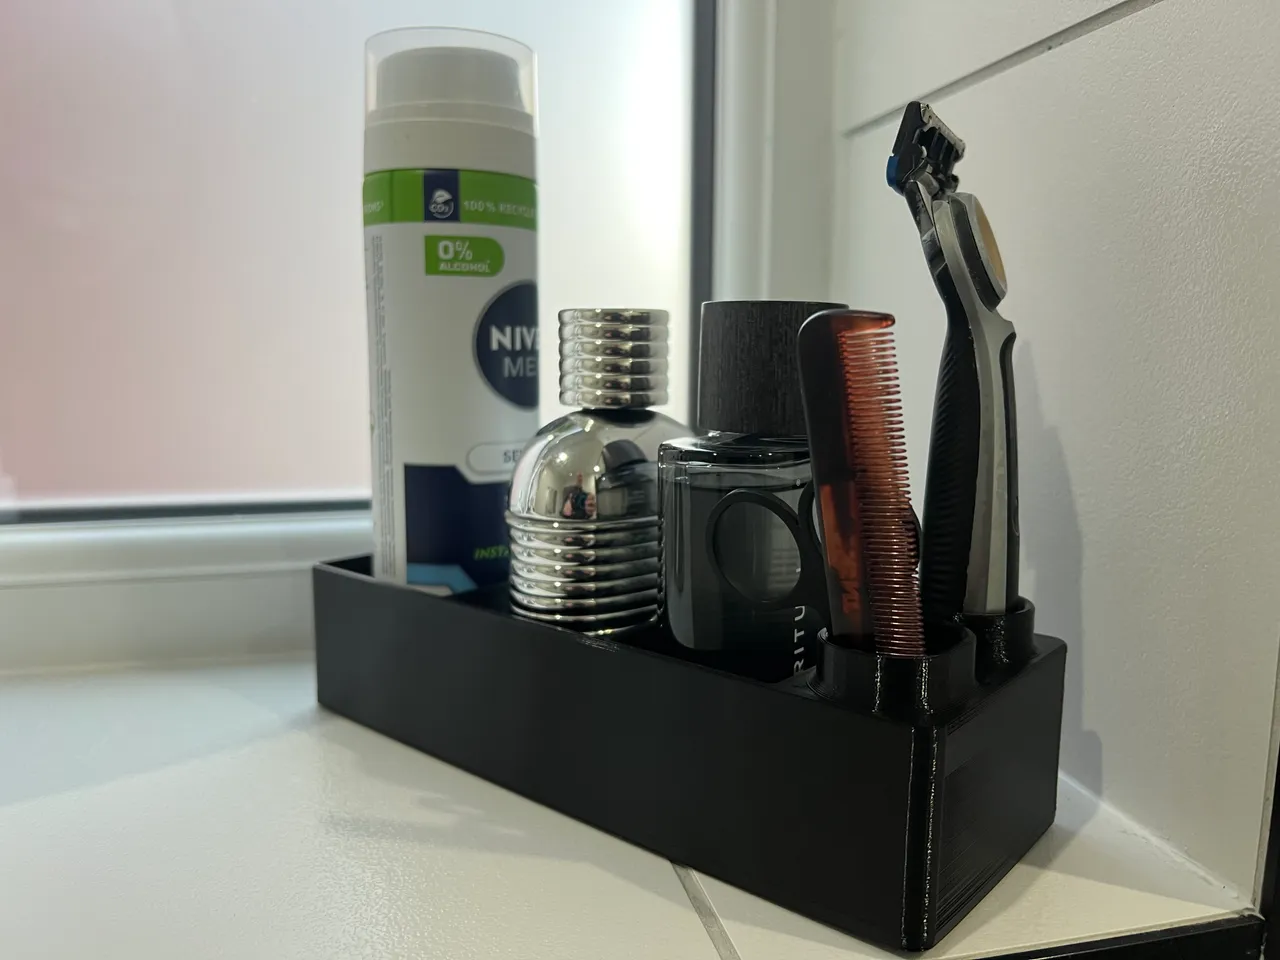 Bathroom Tidy for Shaving Products, Razor and Accessories by Peter